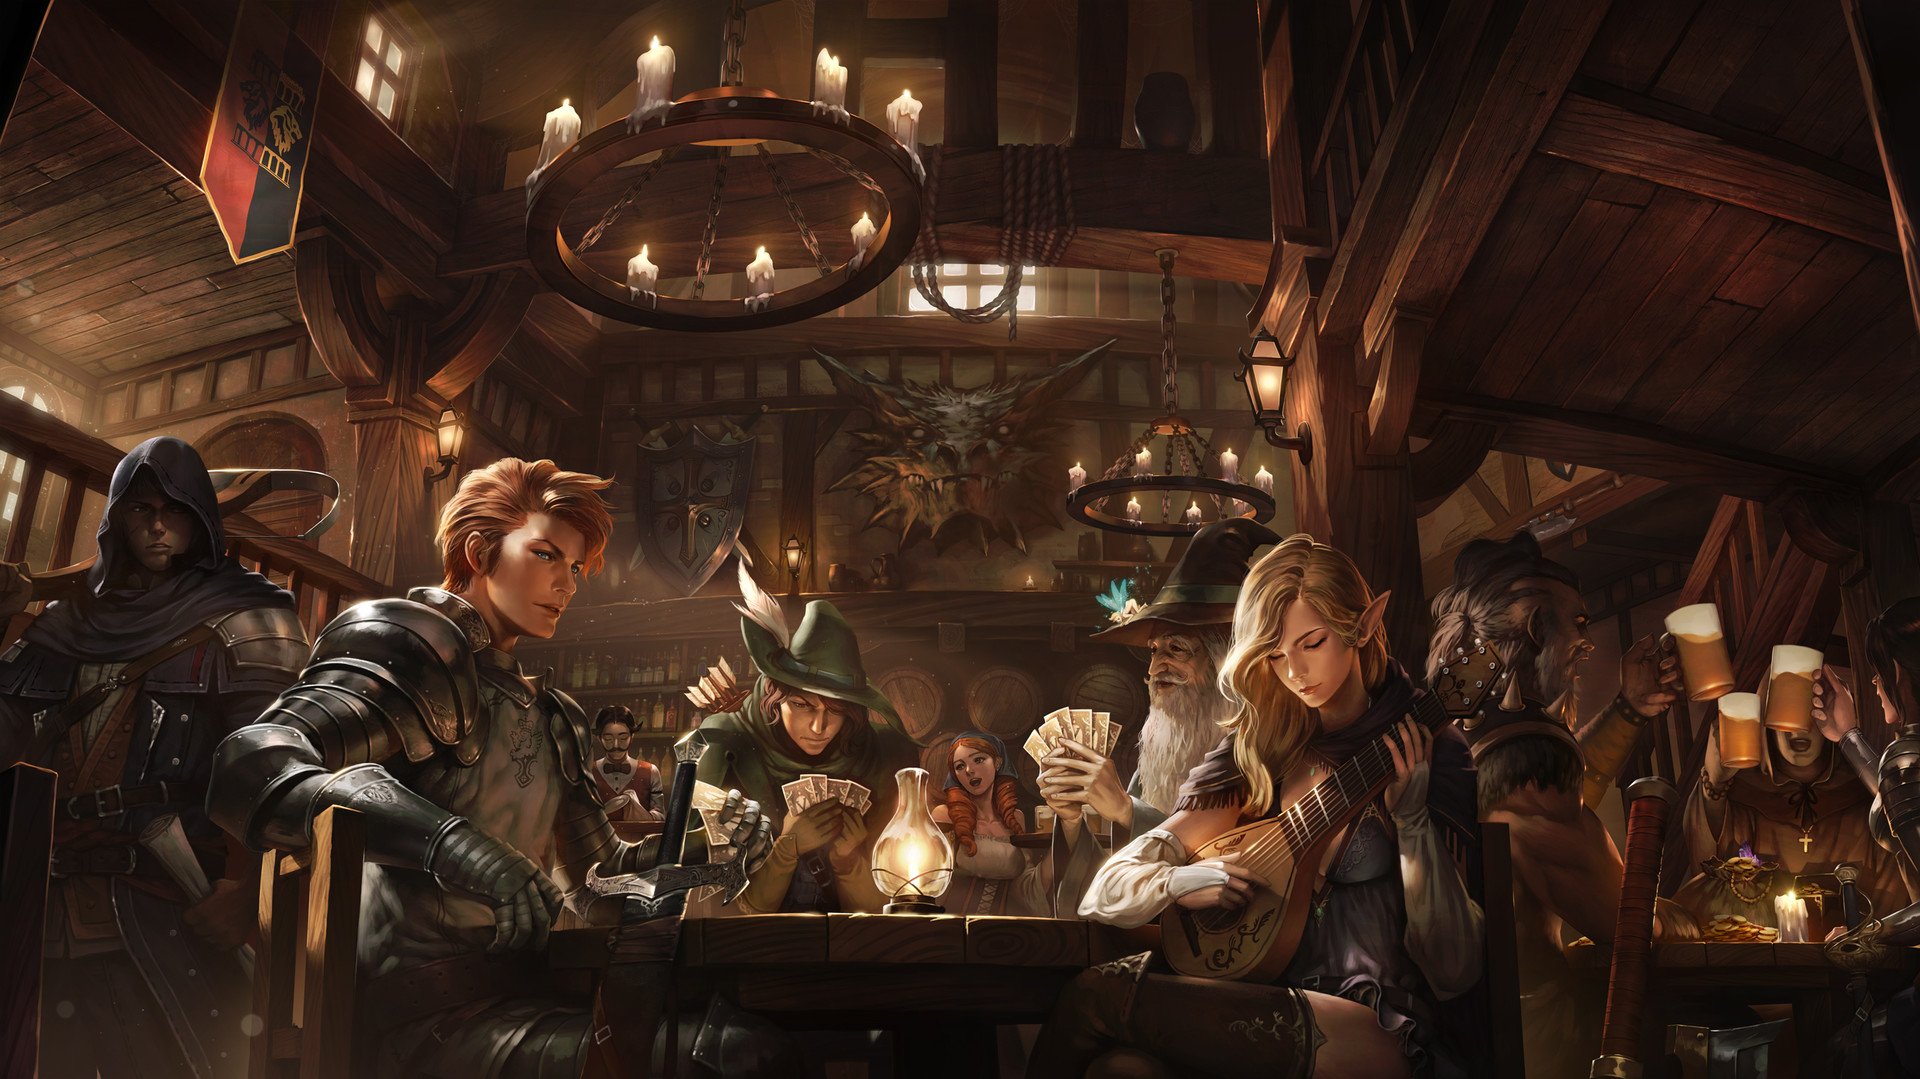 pointed ears, Fantasy art, Tavern, Candles Wallpapers HD / Desktop and